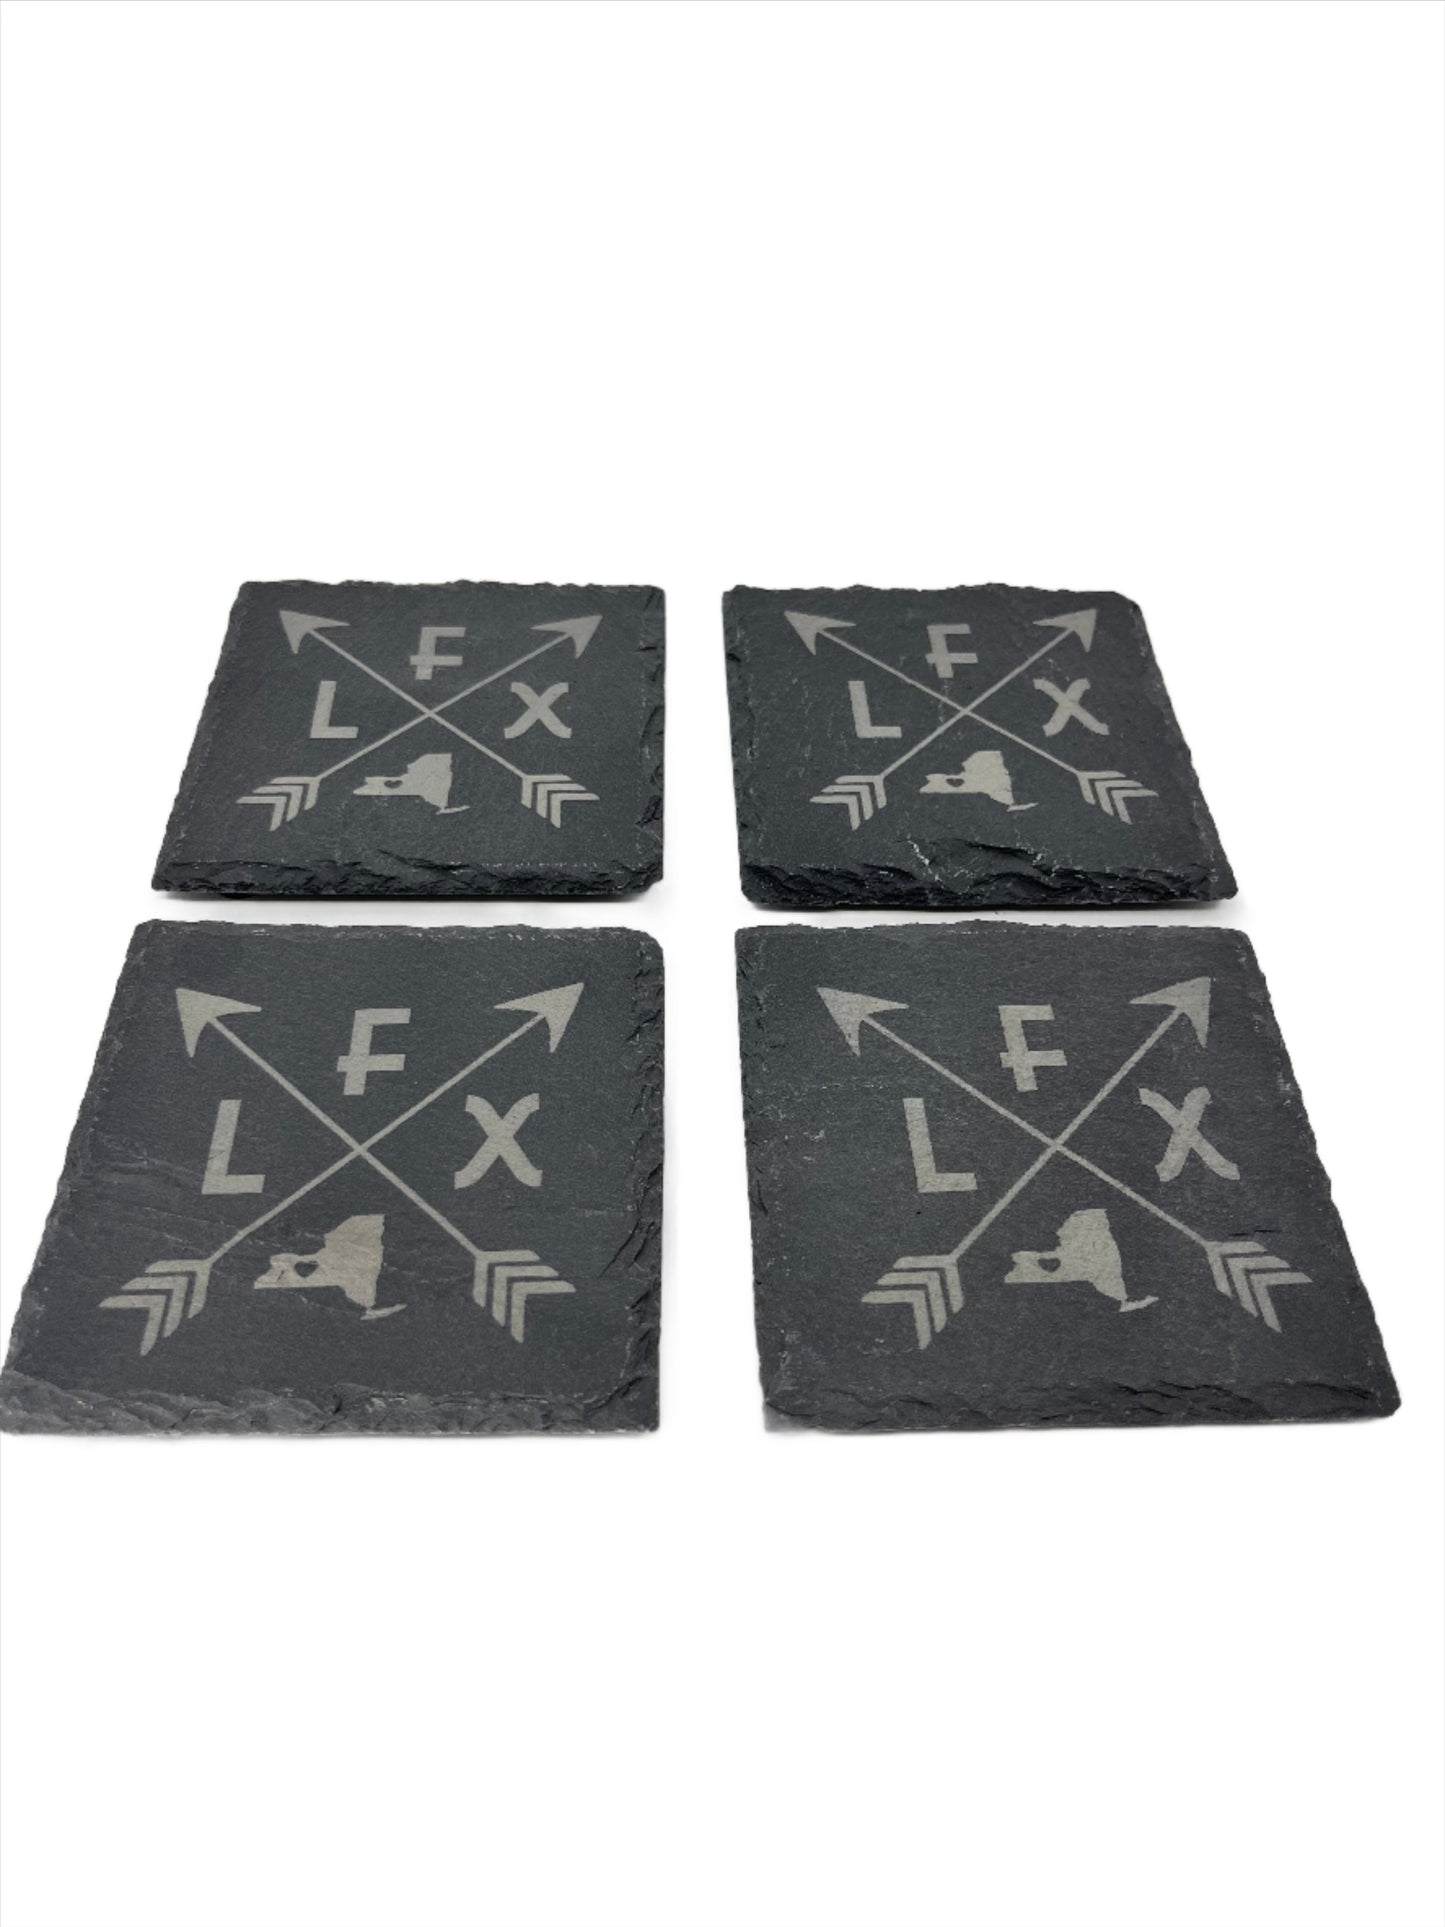 FLX Arrows Etched Slate Coasters - Set of 4